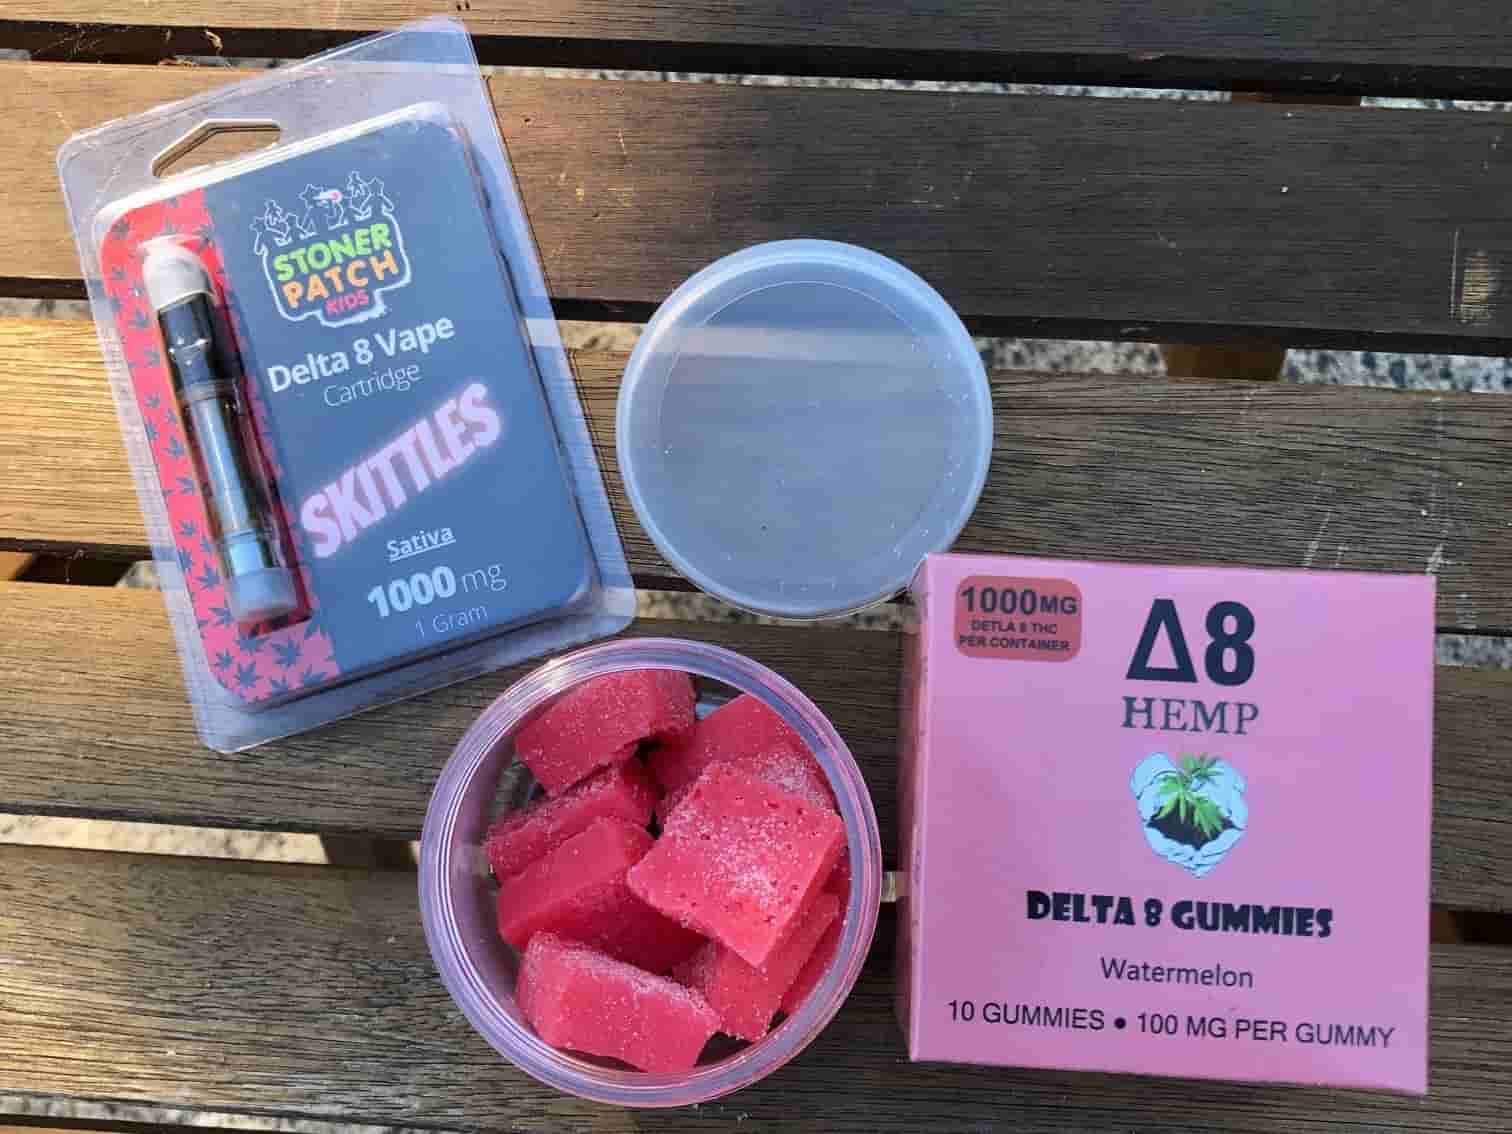 DELTA 8 DISPOSABLE NOT WORKING - Gummies|Thc|Products|Hemp|Product|Brand|Effects|Delta|Gummy|Cbd|Origin|Quality|Dosage|Delta-8|Dose|Usasource|Flavors|Brands|Ingredients|Range|Customers|Edibles|Cartridges|Reviews|Side|List|Health|Cannabis|Lab|Customer|Options|Benefits|Overviewproducts|Research|Time|Market|Drug|Farms|Party|People|Delta-8 Thc|Delta-8 Products|Delta-9 Thc|Delta-8 Gummies|Delta-8 Thc Products|Delta-8 Brands|Customer Reviews|Brand Overviewproducts|Drug Tests|Free Shipping|Similar Benefits|Vape Cartridges|Hemp Doctor|United States|Third Party Lab|Drug Test|Thc Edibles|Health Canada|Cannabis Plant|Side Effects|Organic Hemp|Diamond Cbd|Reaction Time|Legal Hemp|Psychoactive Effects|Psychoactive Properties|Third Party|Dry Eyes|Delta-8 Market|Tolerance Level